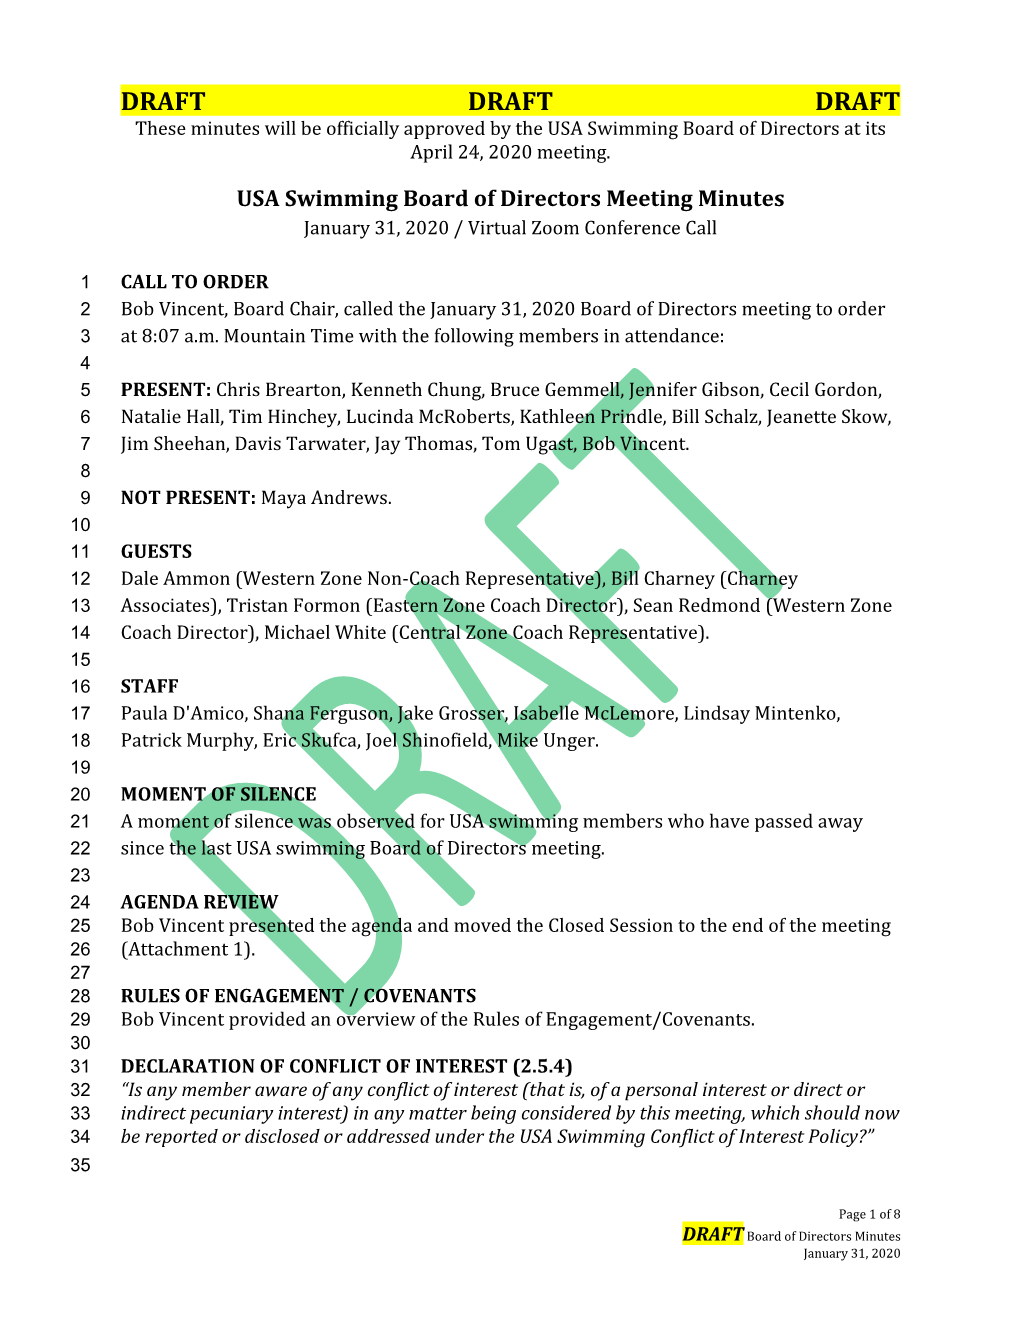 DRAFT DRAFT DRAFT These Minutes Will Be Officially Approved by the USA Swimming Board of Directors at Its April 24, 2020 Meeting